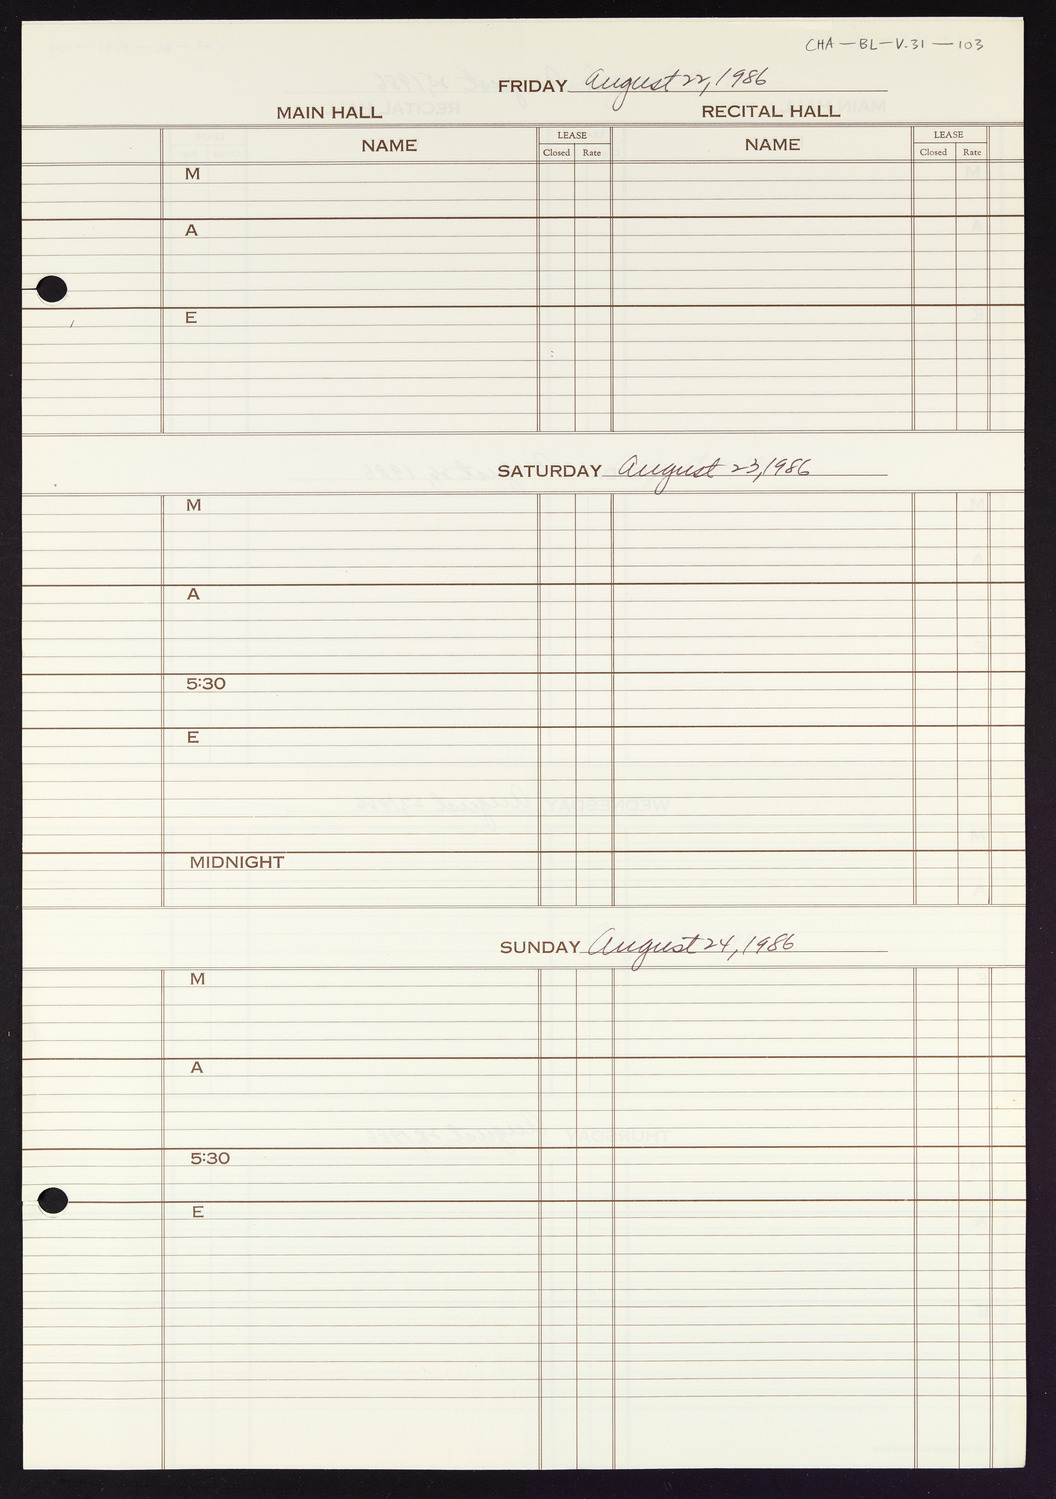 Carnegie Hall Booking Ledger, volume 31, page 103